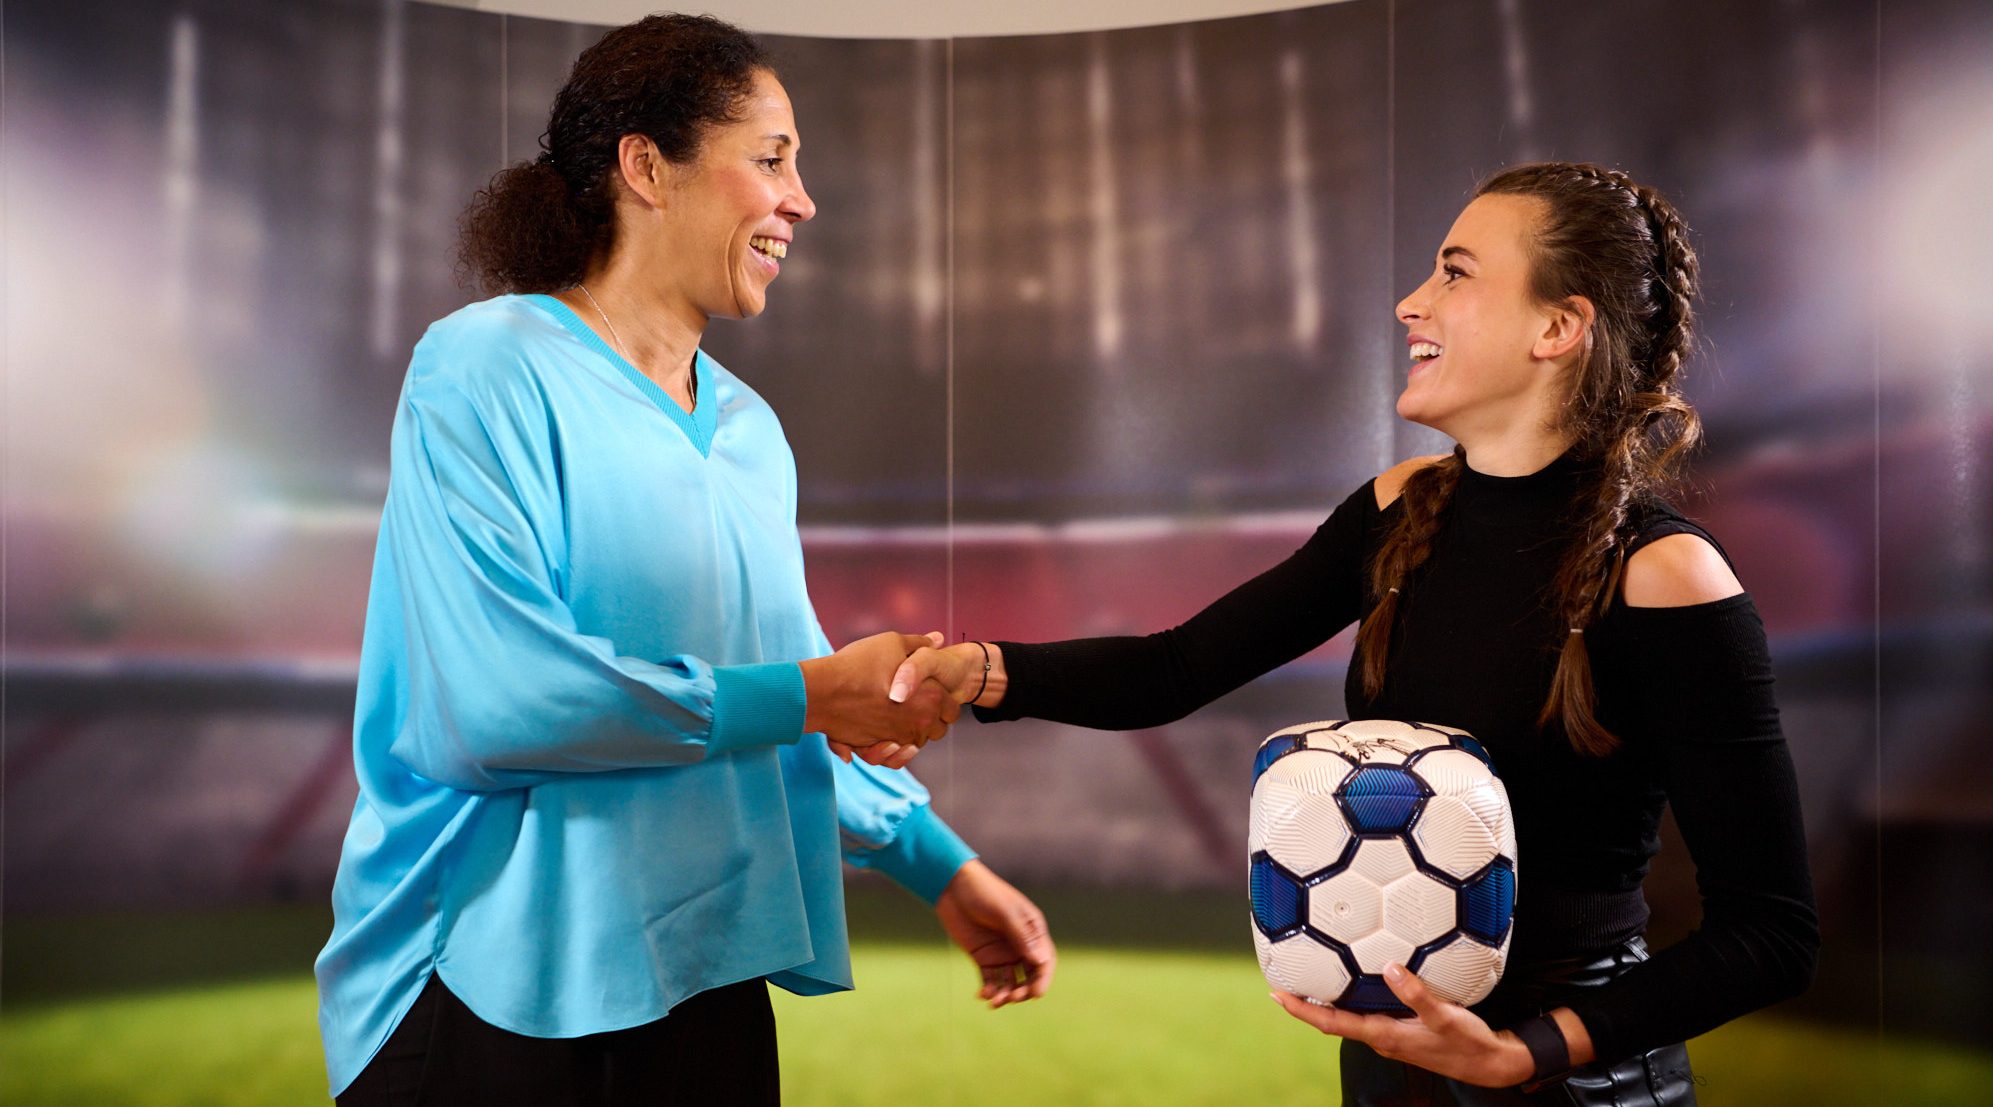 Discussion round with audience and women soccer players of the FC Bayern München in a studio discussing on the topic The Squared Ball